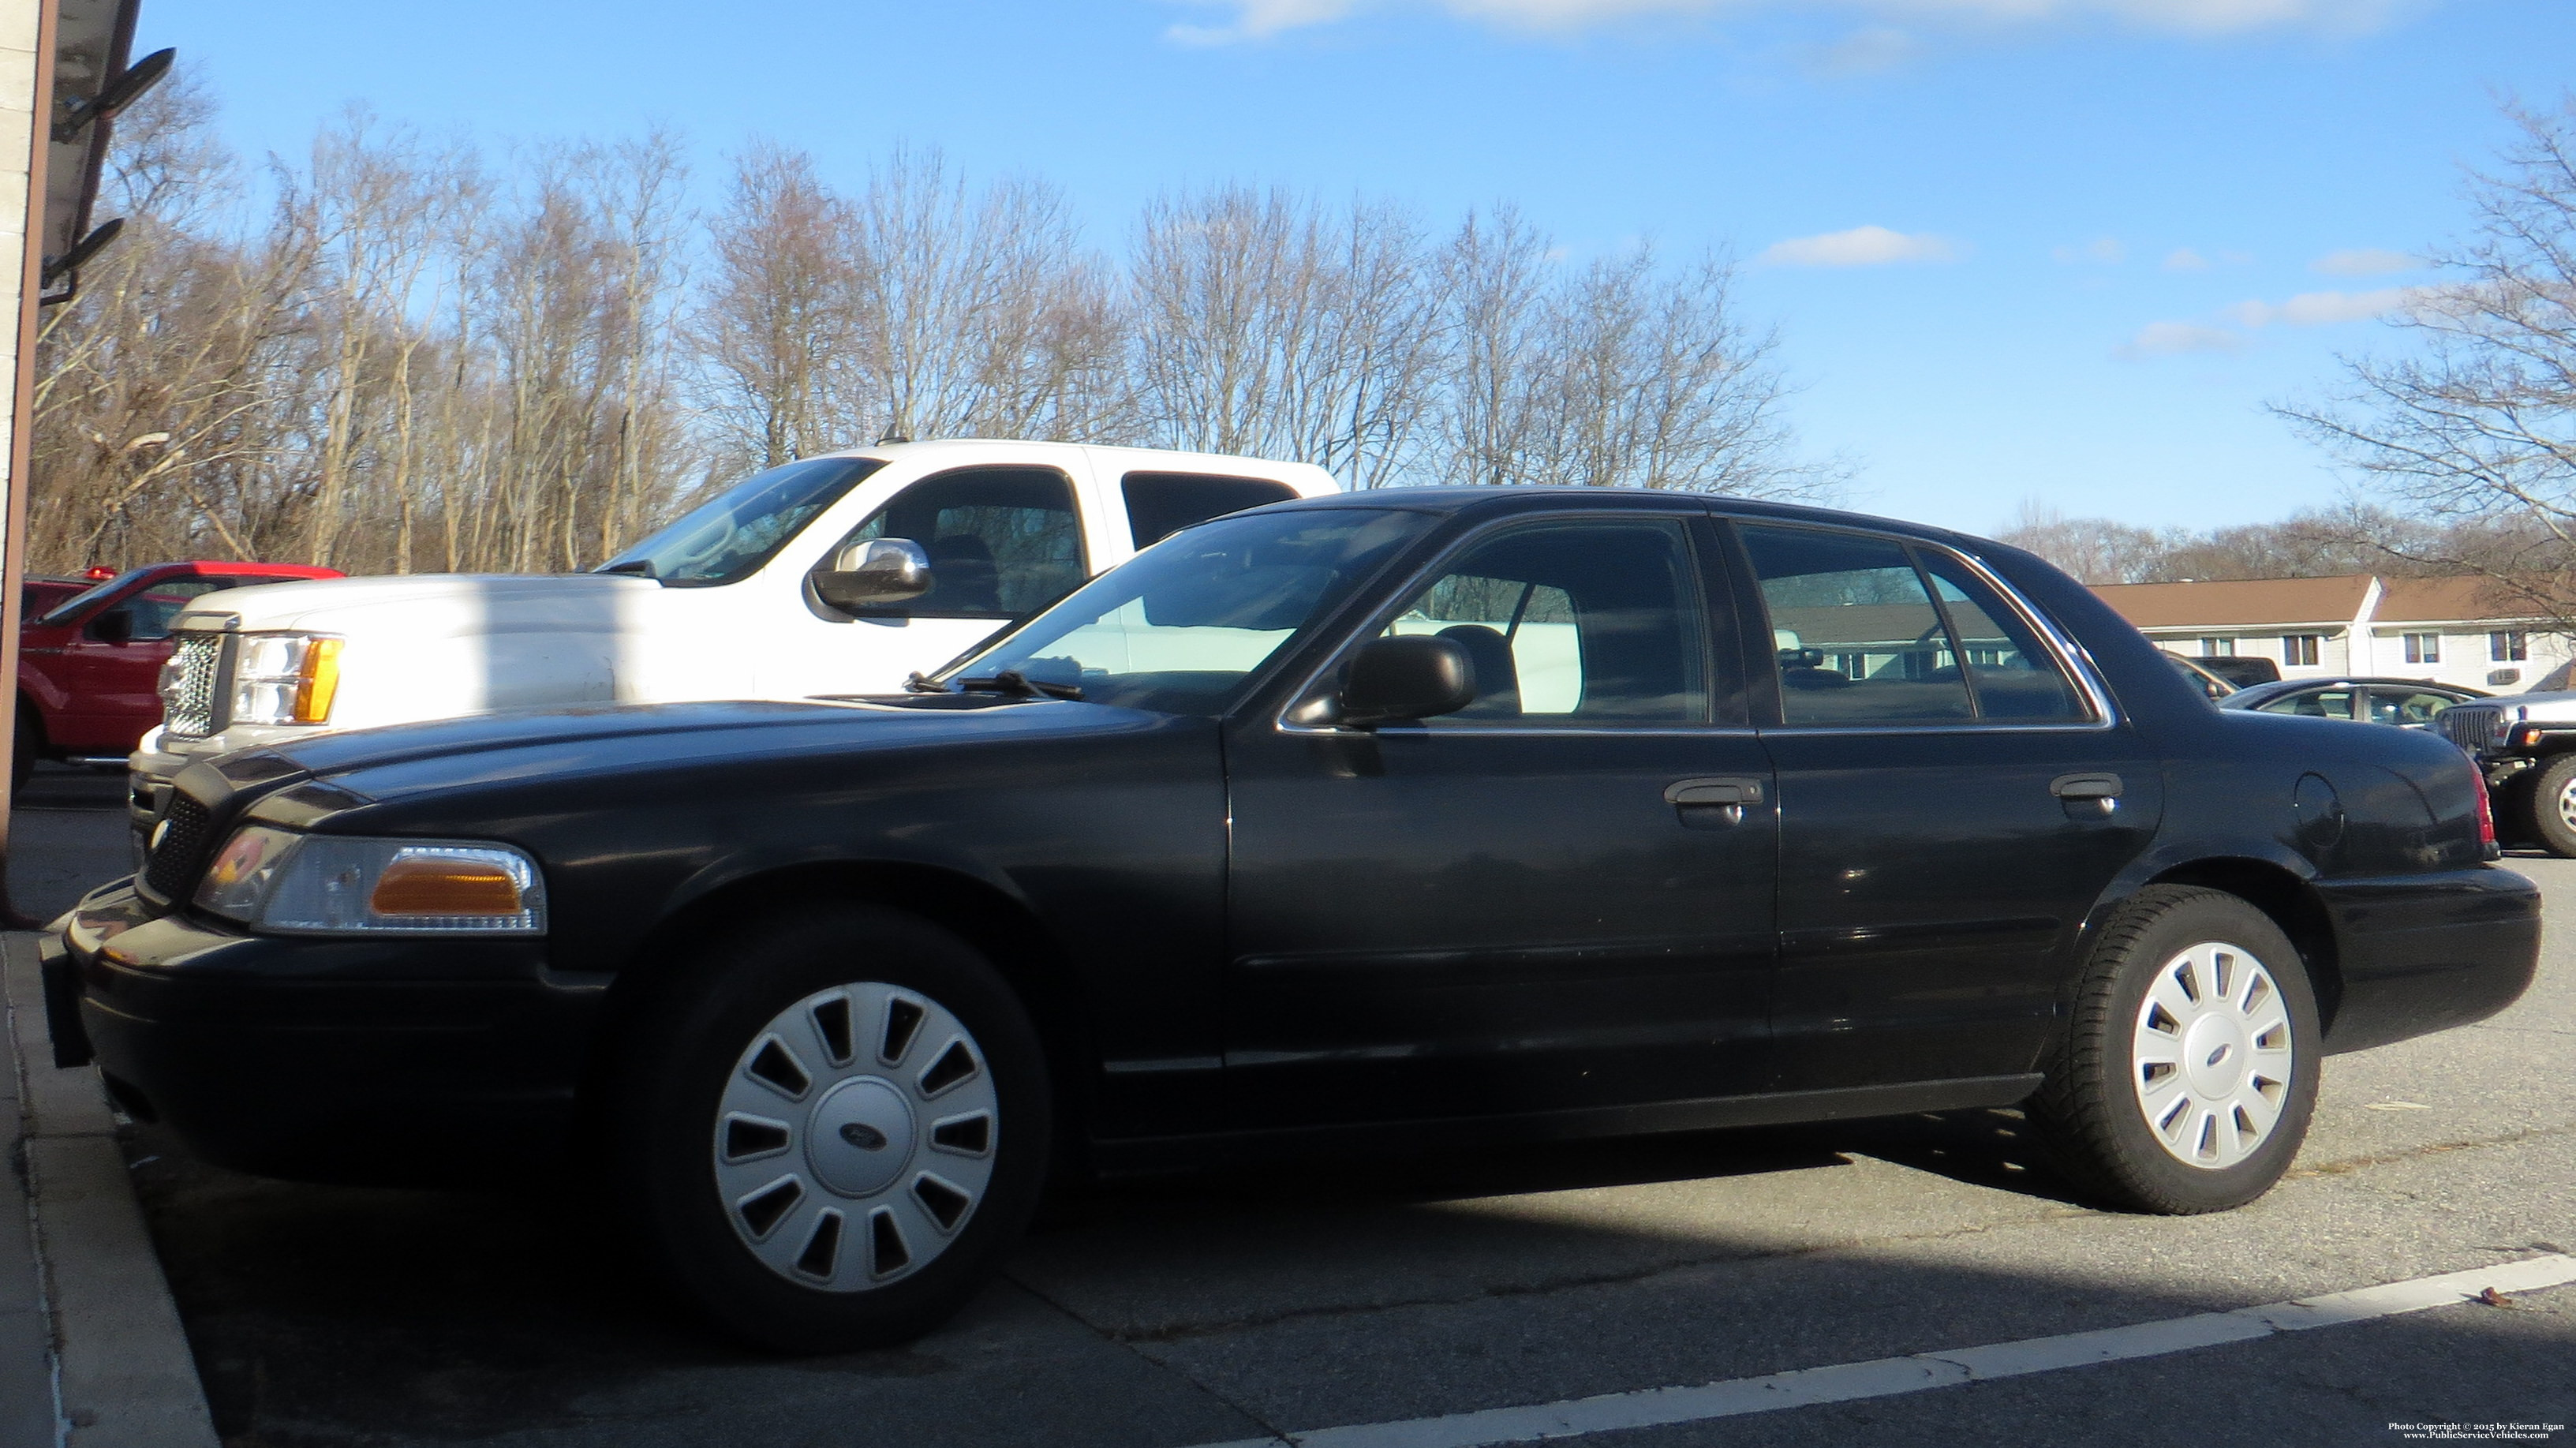 A photo  of North Kingstown Police
            Administration Captain's Unit, a 2006-2008 Ford Crown Victoria Police Interceptor             taken by Kieran Egan